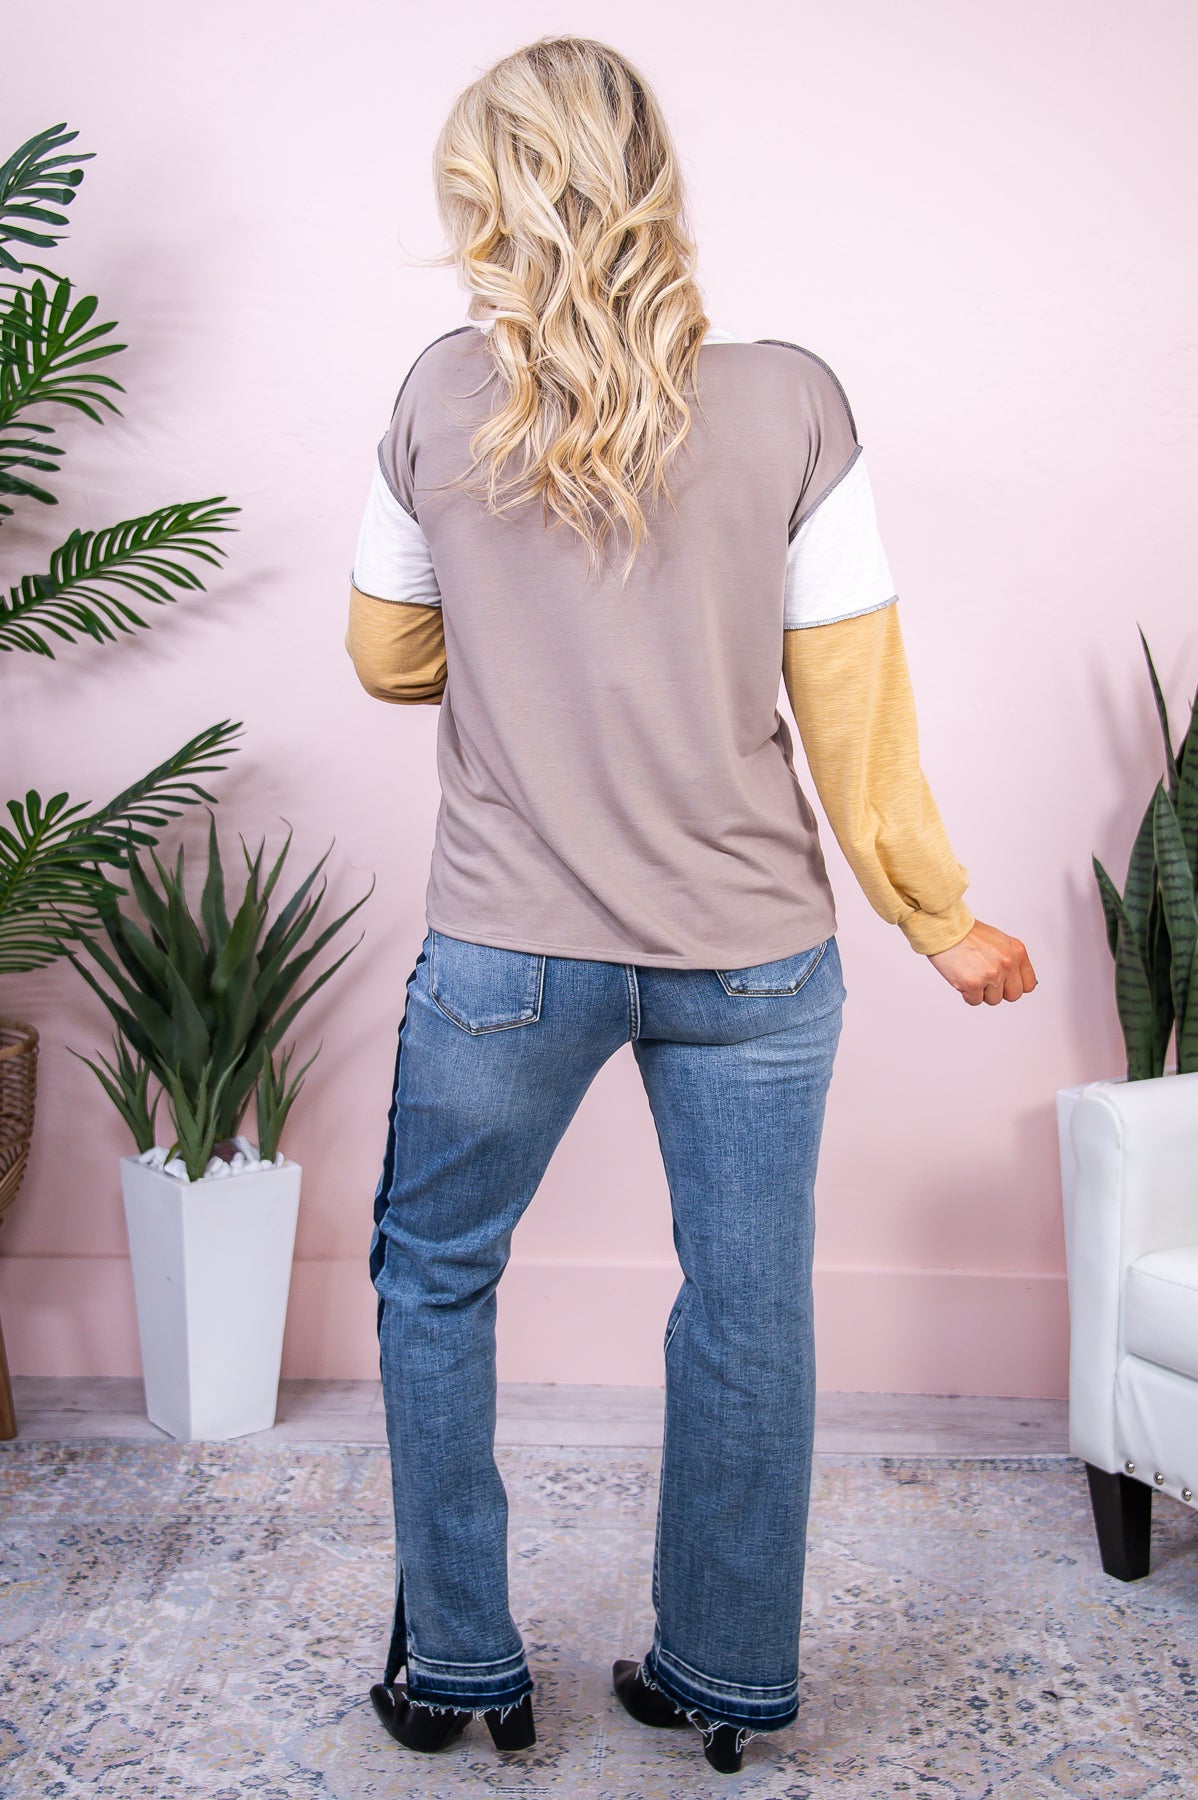 Stay Unique Ivory/Mustard/Mocha Colorblock Top - T8207IV